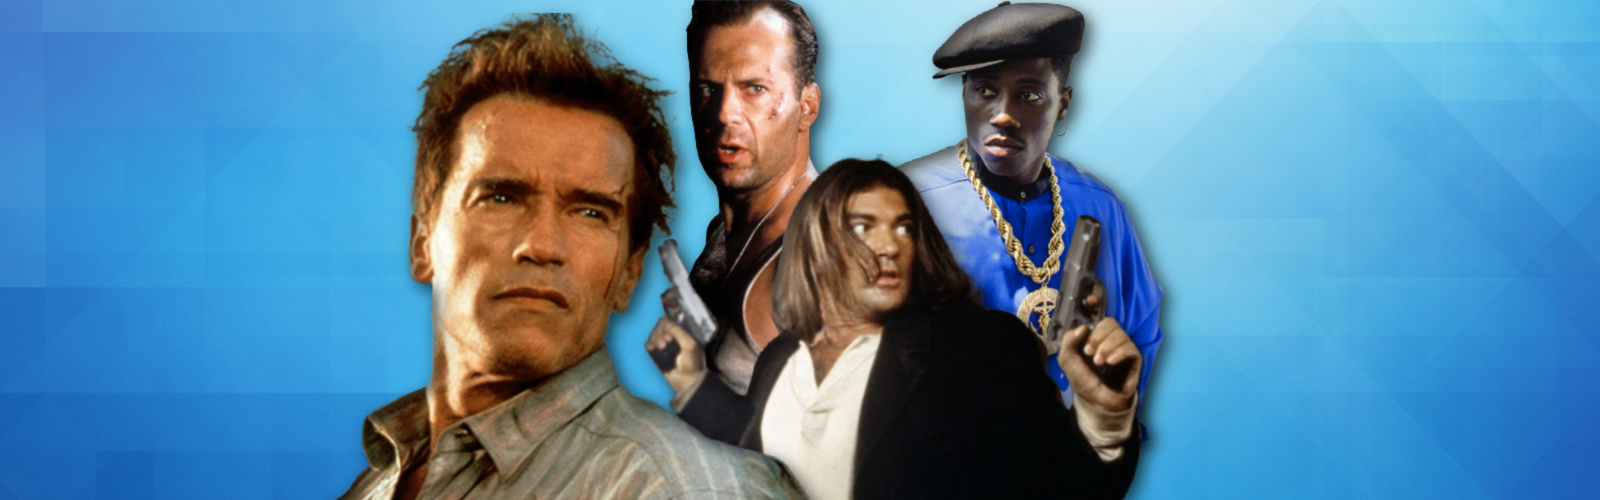 90s Action Movies